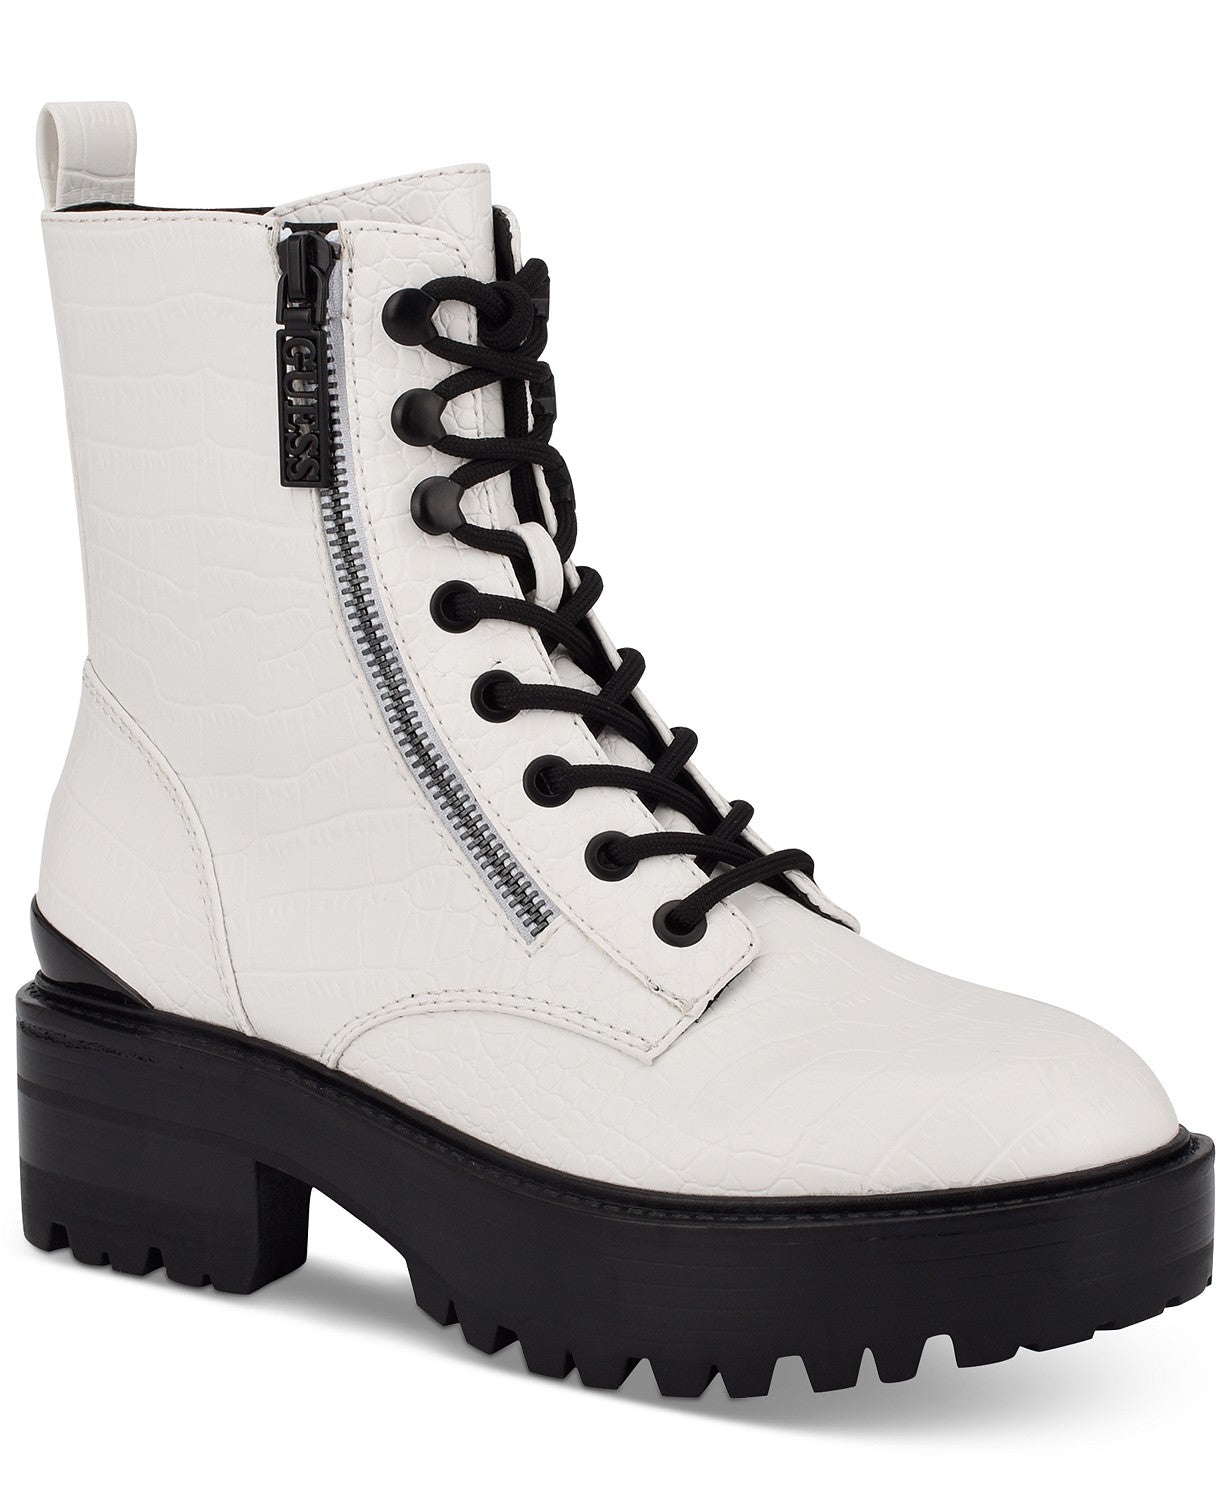 Guess Botines Lace-Up Blancos